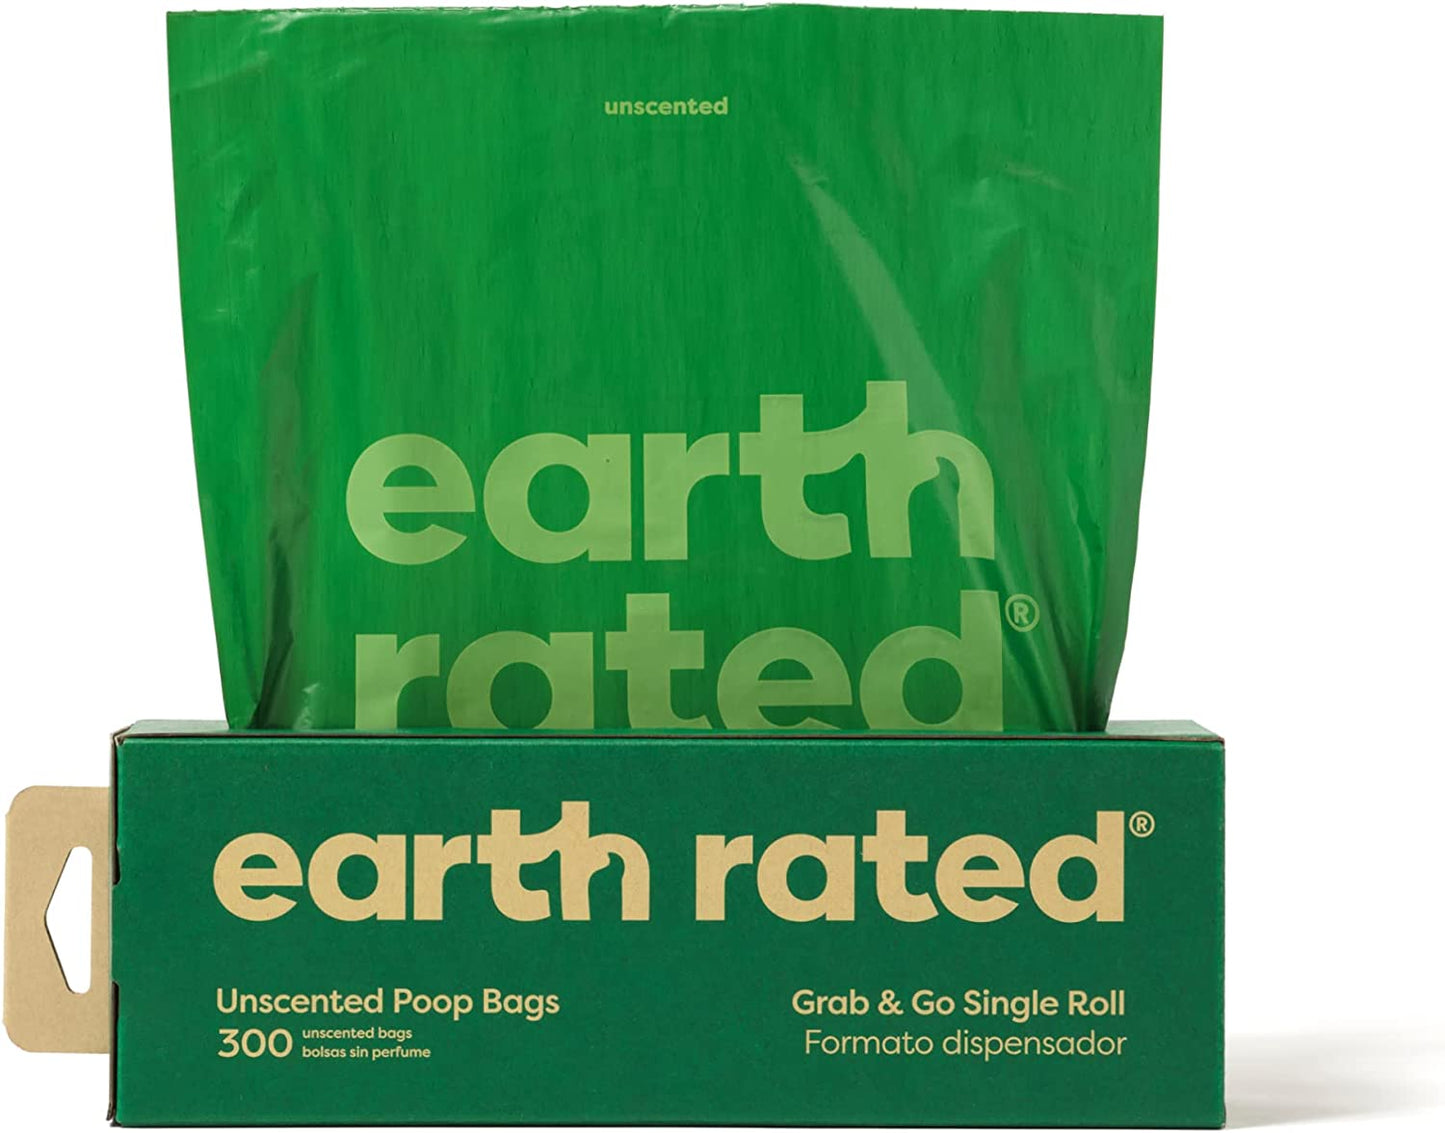 Earth Rated Poop Bags Unscented Bags 300 Bulk Roll